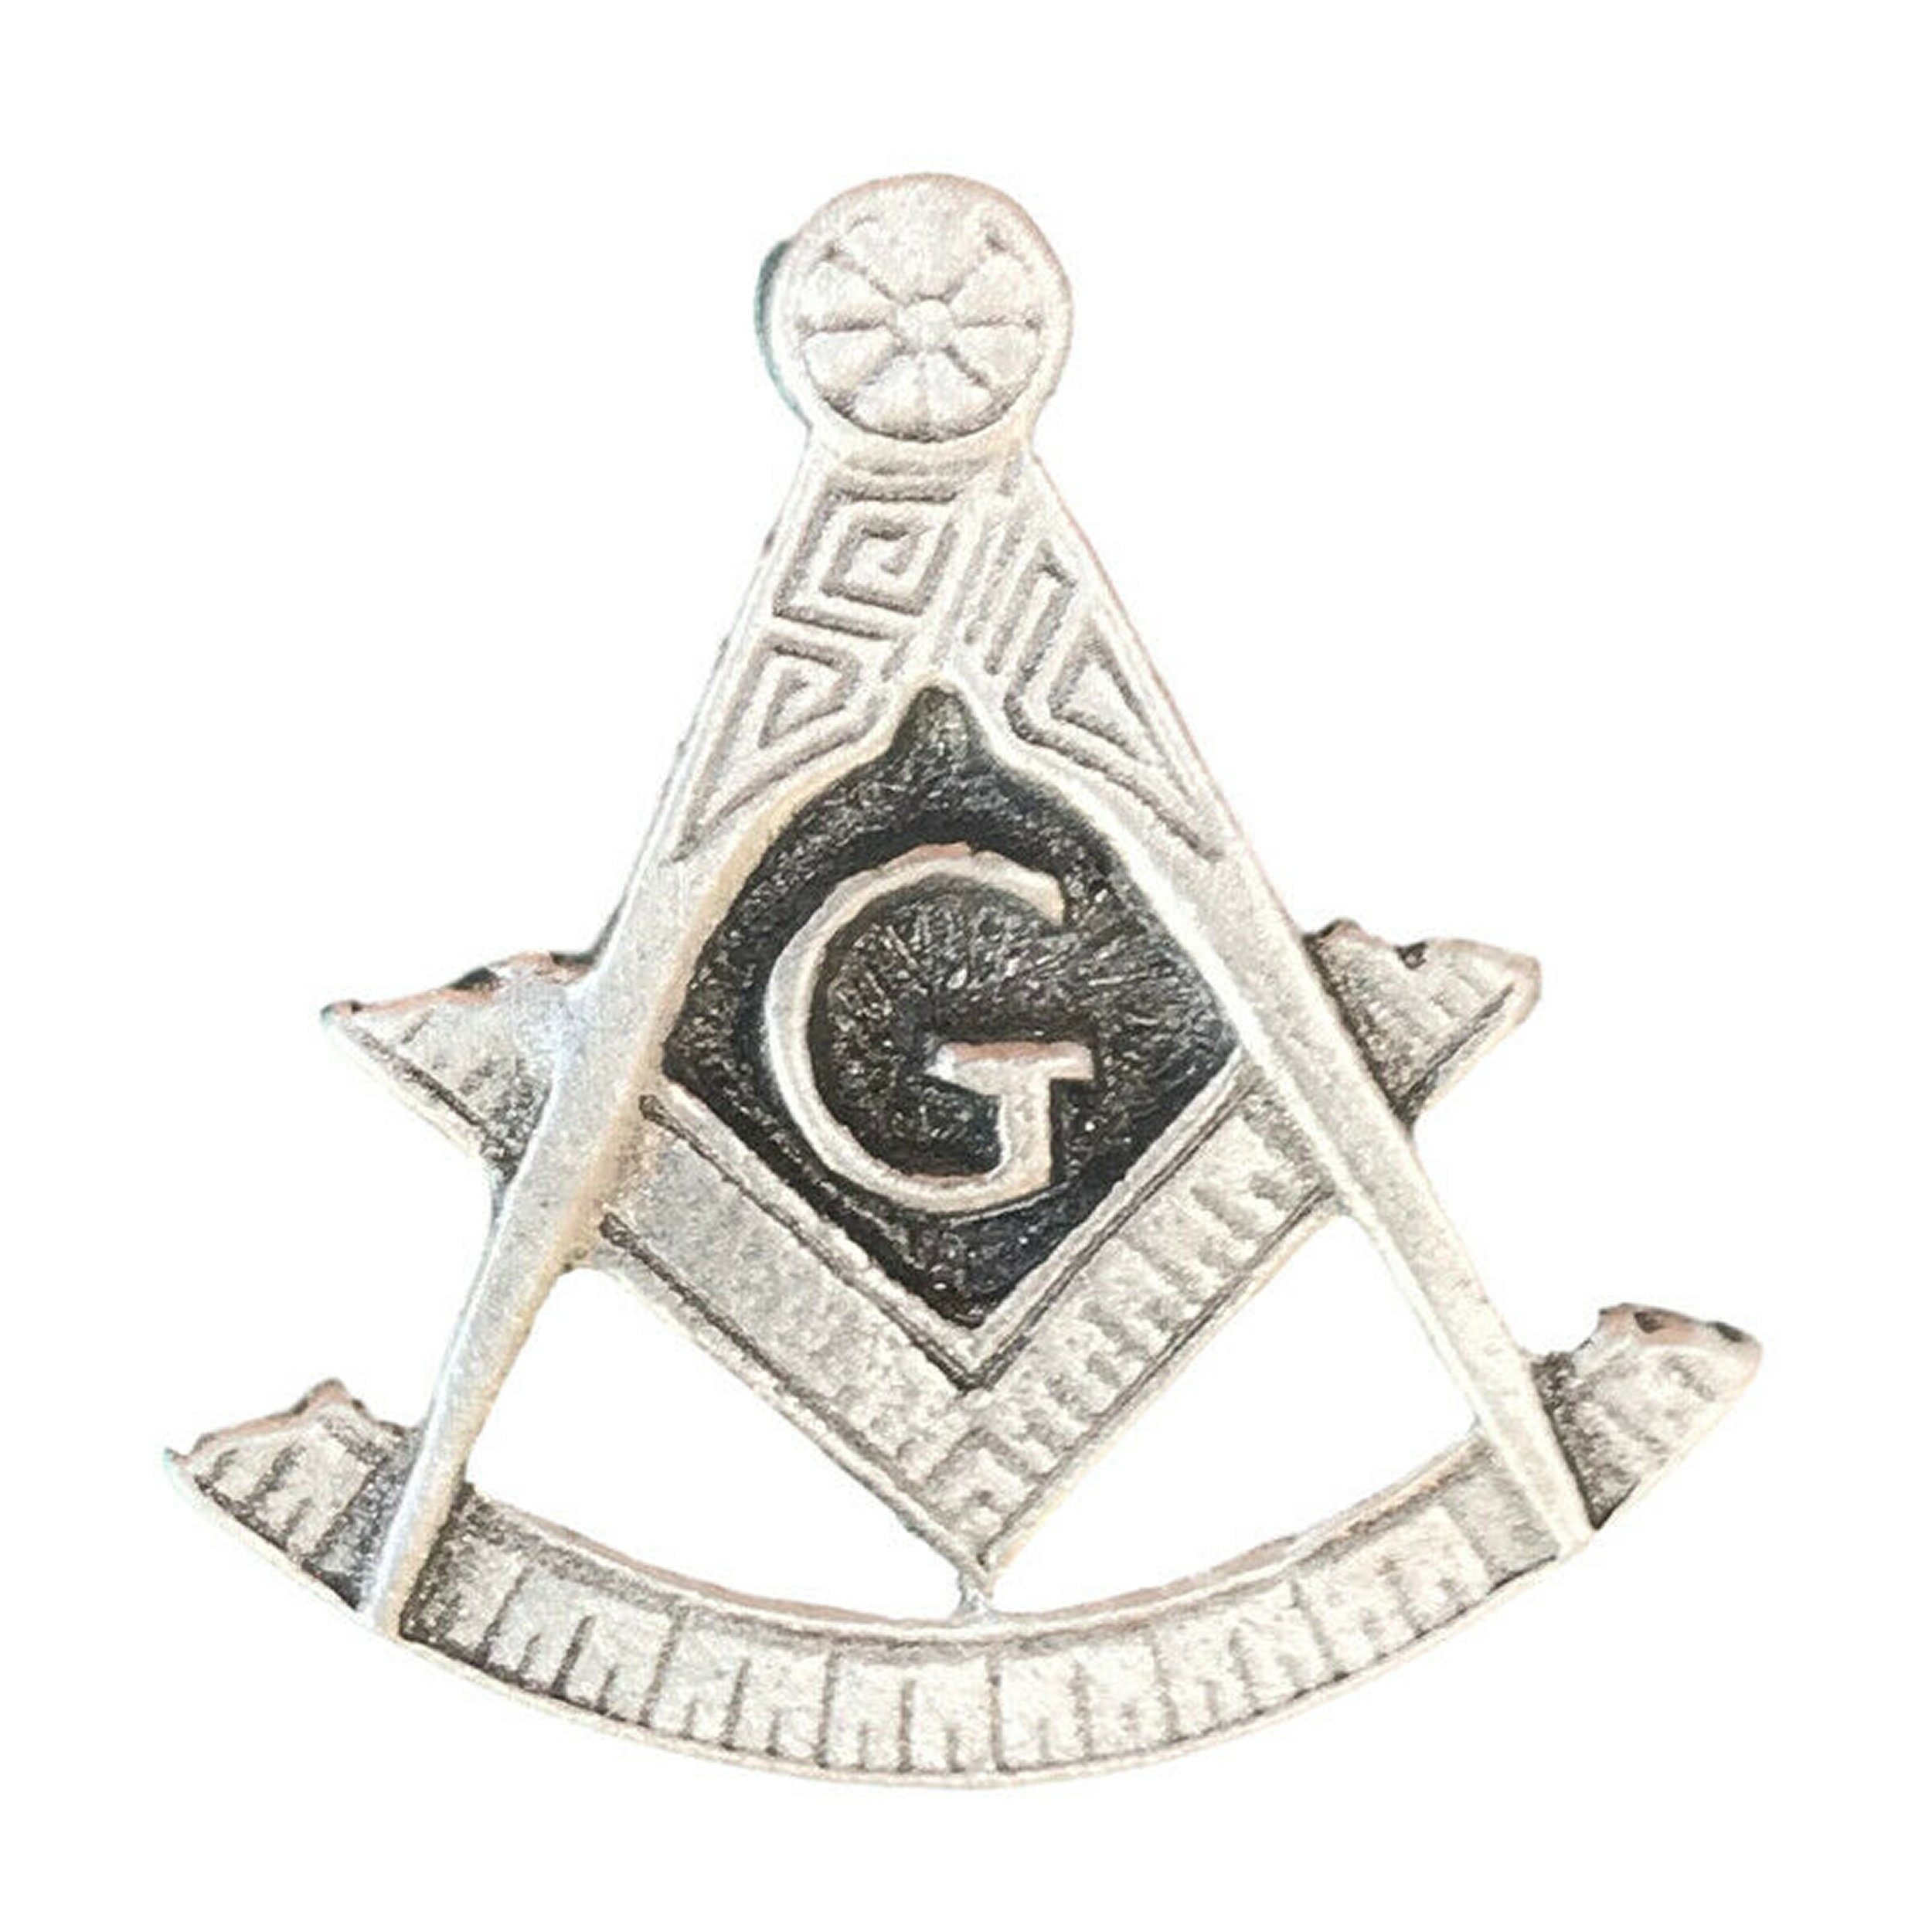 2 x Masonic Crest Square Compass Handcrafted From English Pewter Pin Badges-PAG